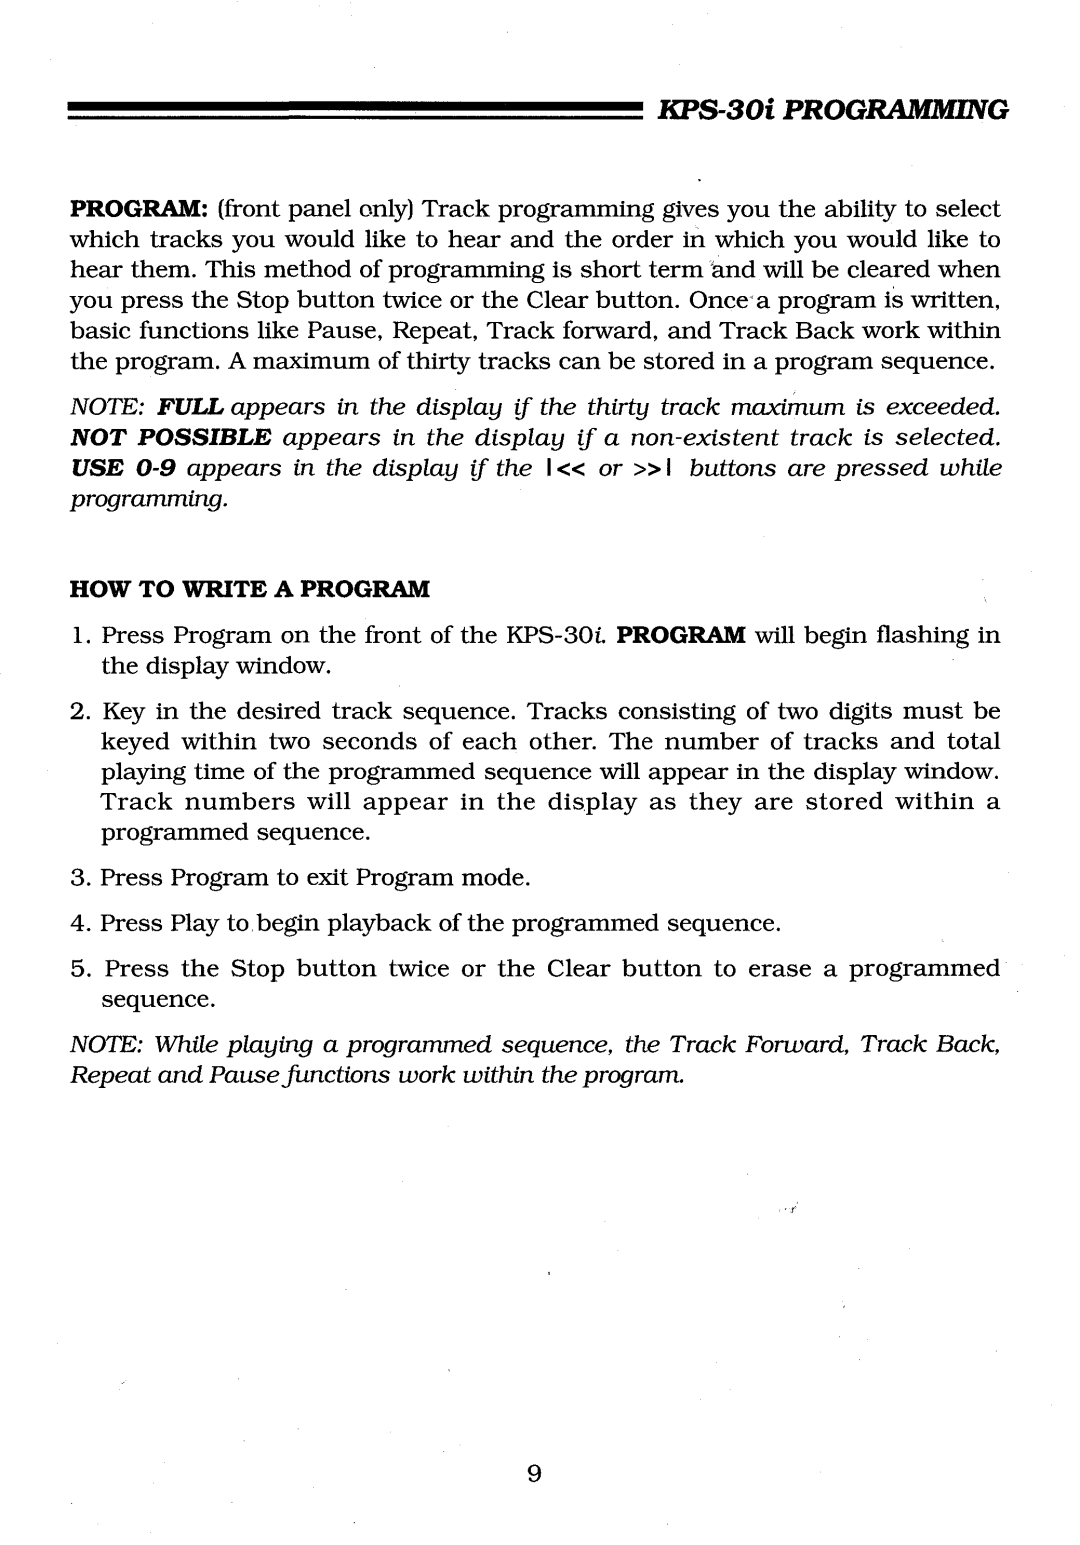 Krell Industries manual KPS-30iPROGRAMMING, How To Write A Program 